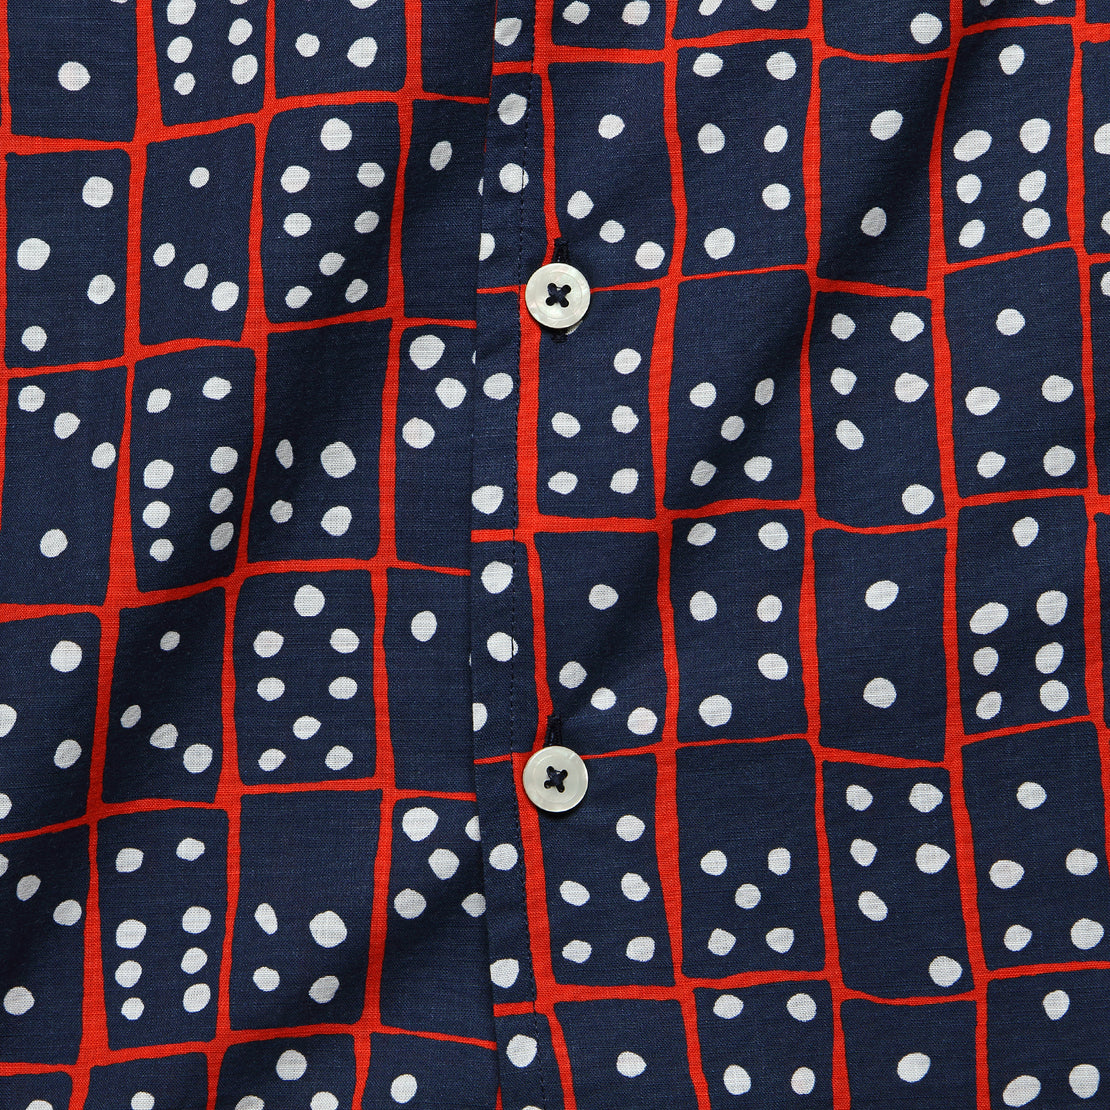 Domino Camp Shirt - Navy/Red - Todd Snyder - STAG Provisions - Tops - S/S Woven - Other Pattern